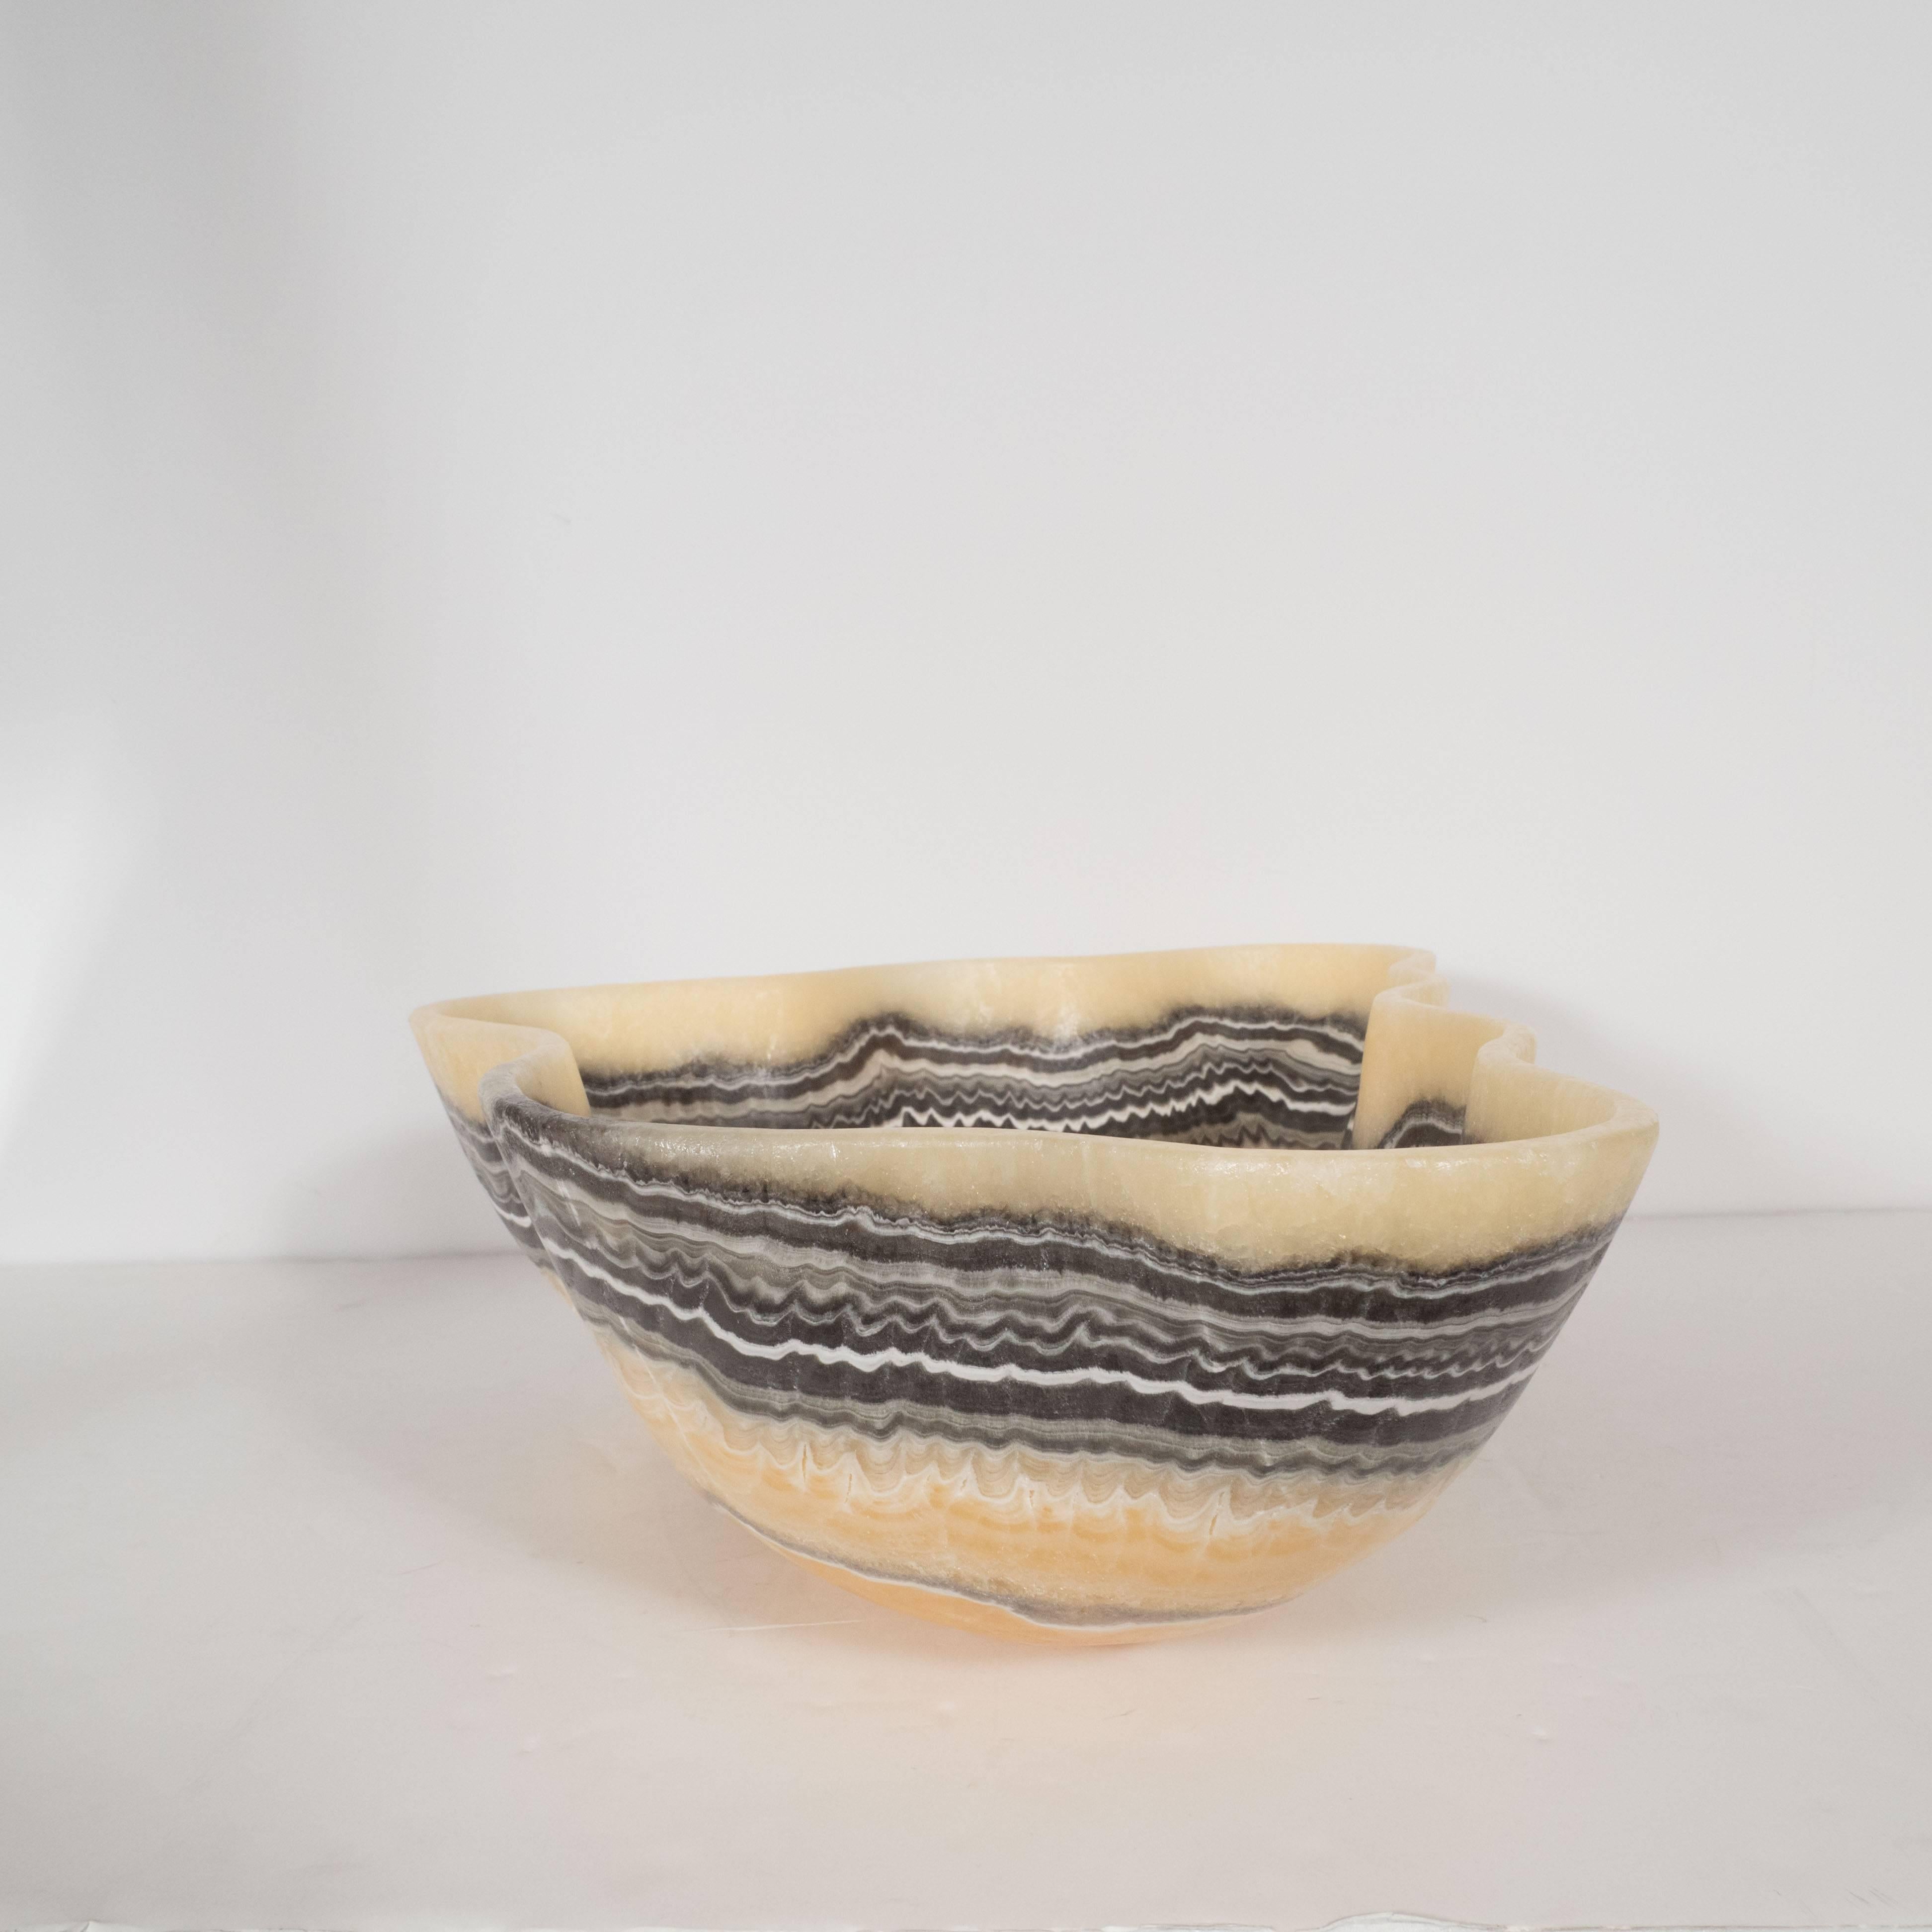 Sophisticated Organic Modern Agate Bowl in Grisaille and Honeyed Tones 3